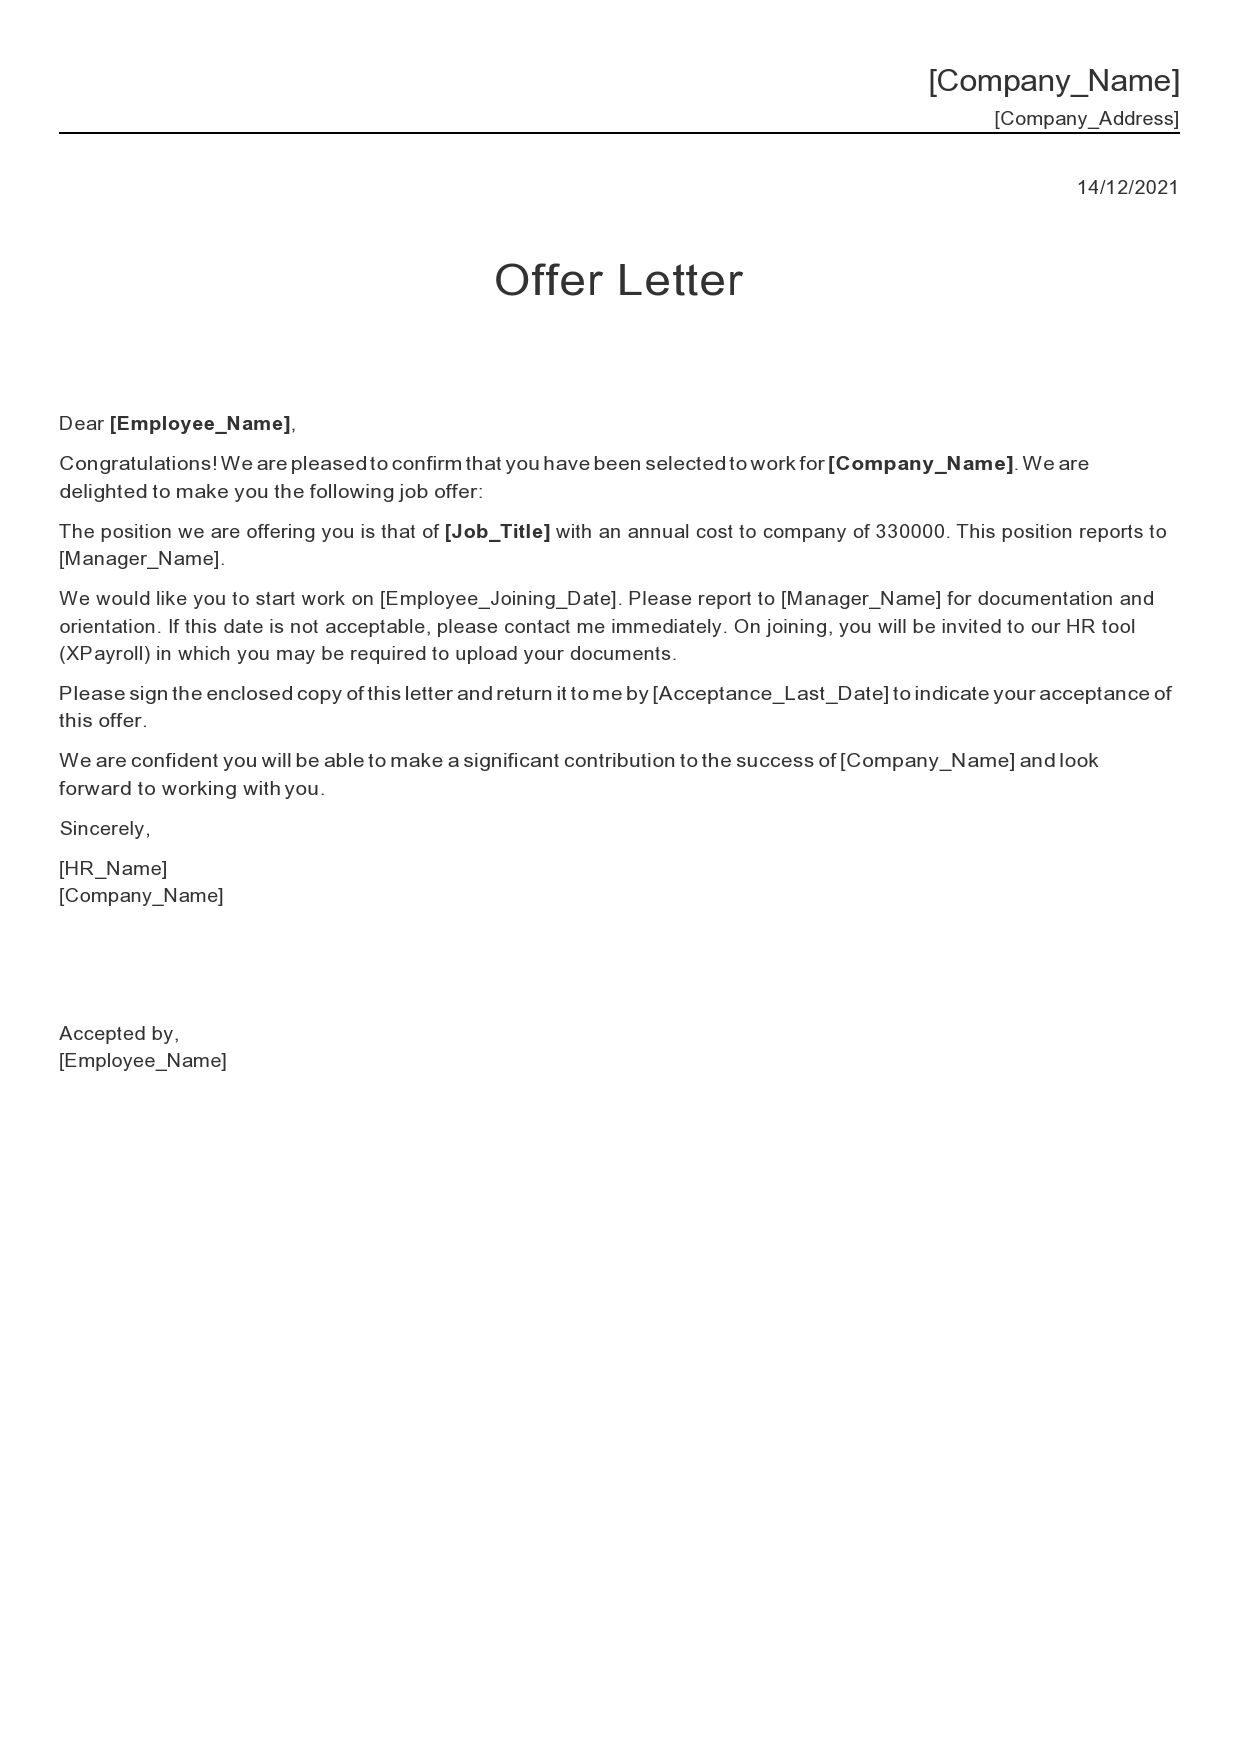 Free employment offer letter template 19